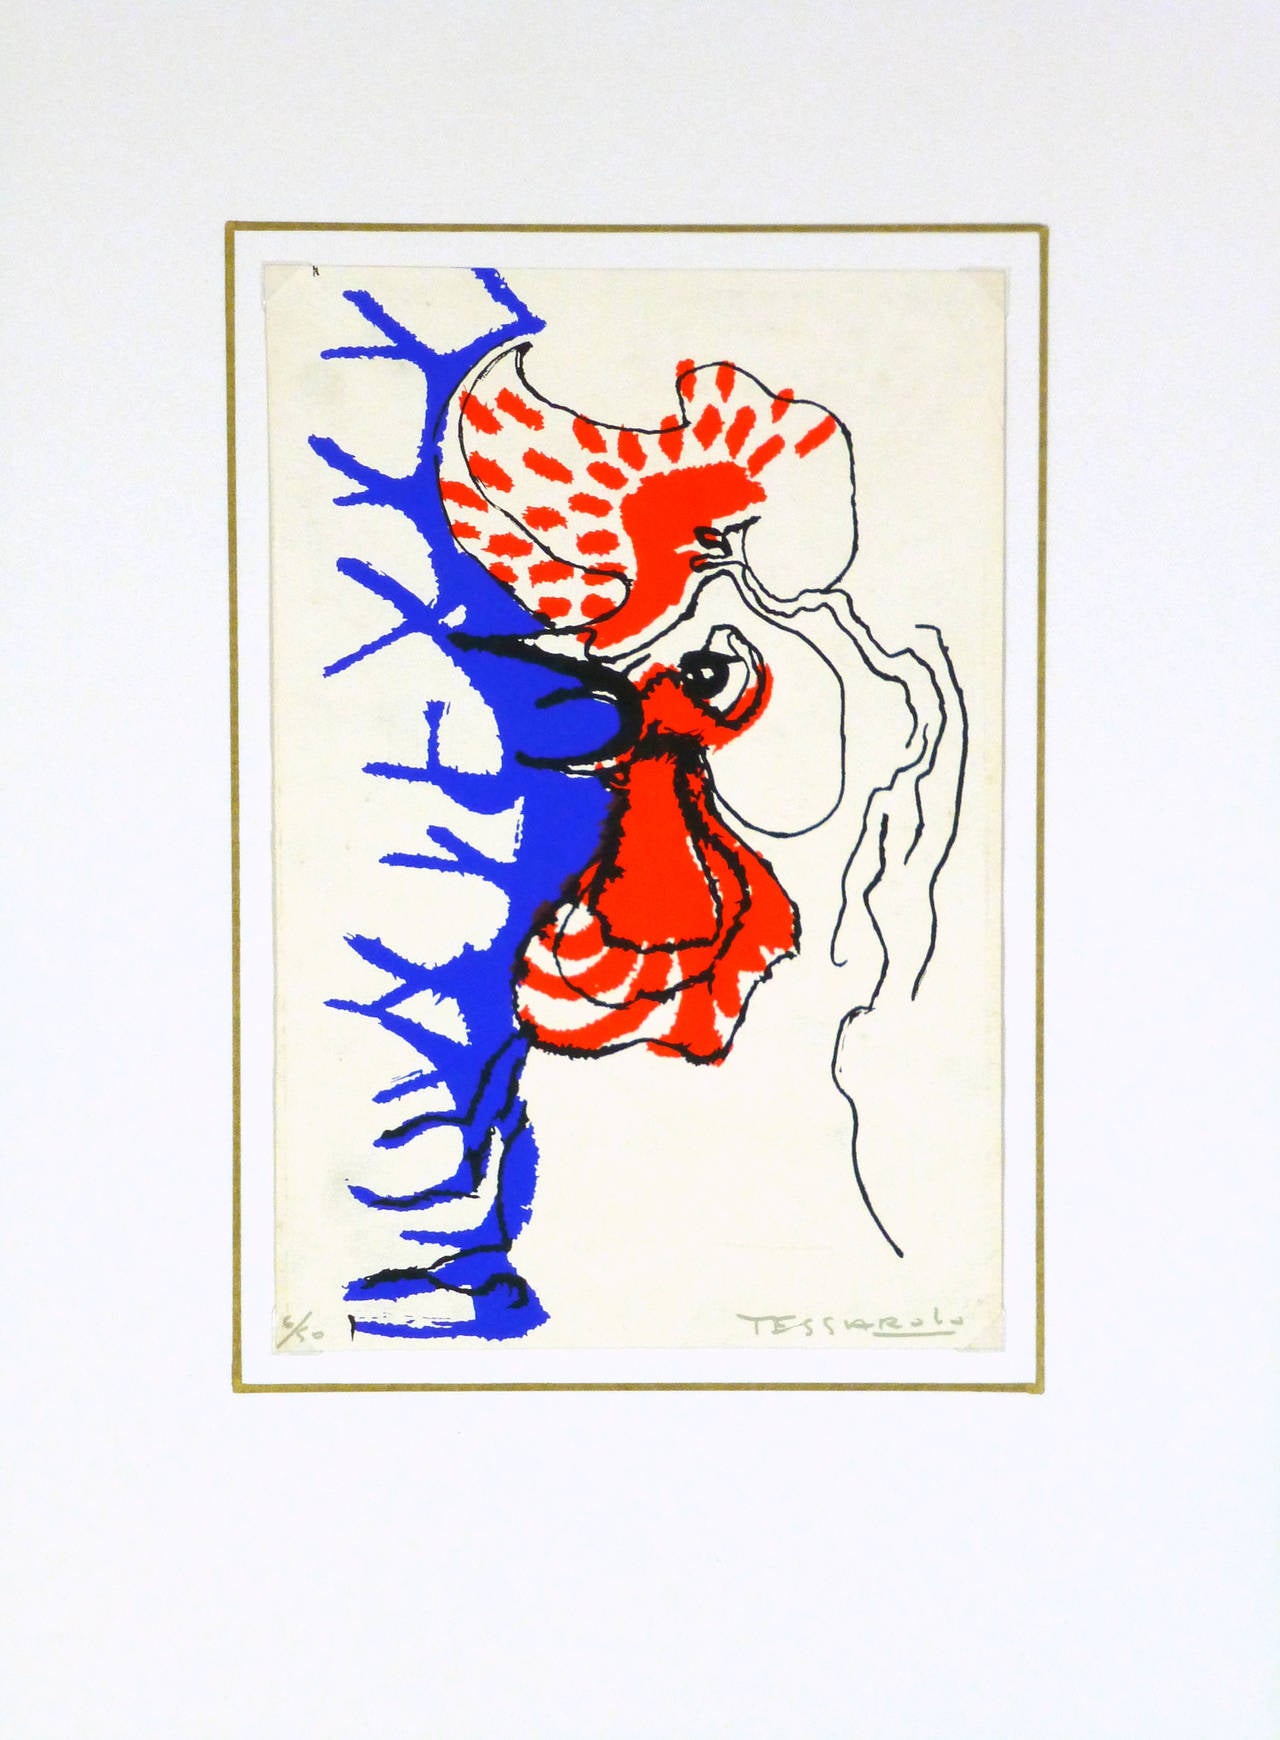 Esthetic serigraph rendered in bold primary colors of a handsome rooster crowing by French artist Lucien Tessarolo, circa 1965. Signed lower right, numbered 6 of 50 lower left.

Original one-of-a-kind artwork on paper displayed on a white mat with a